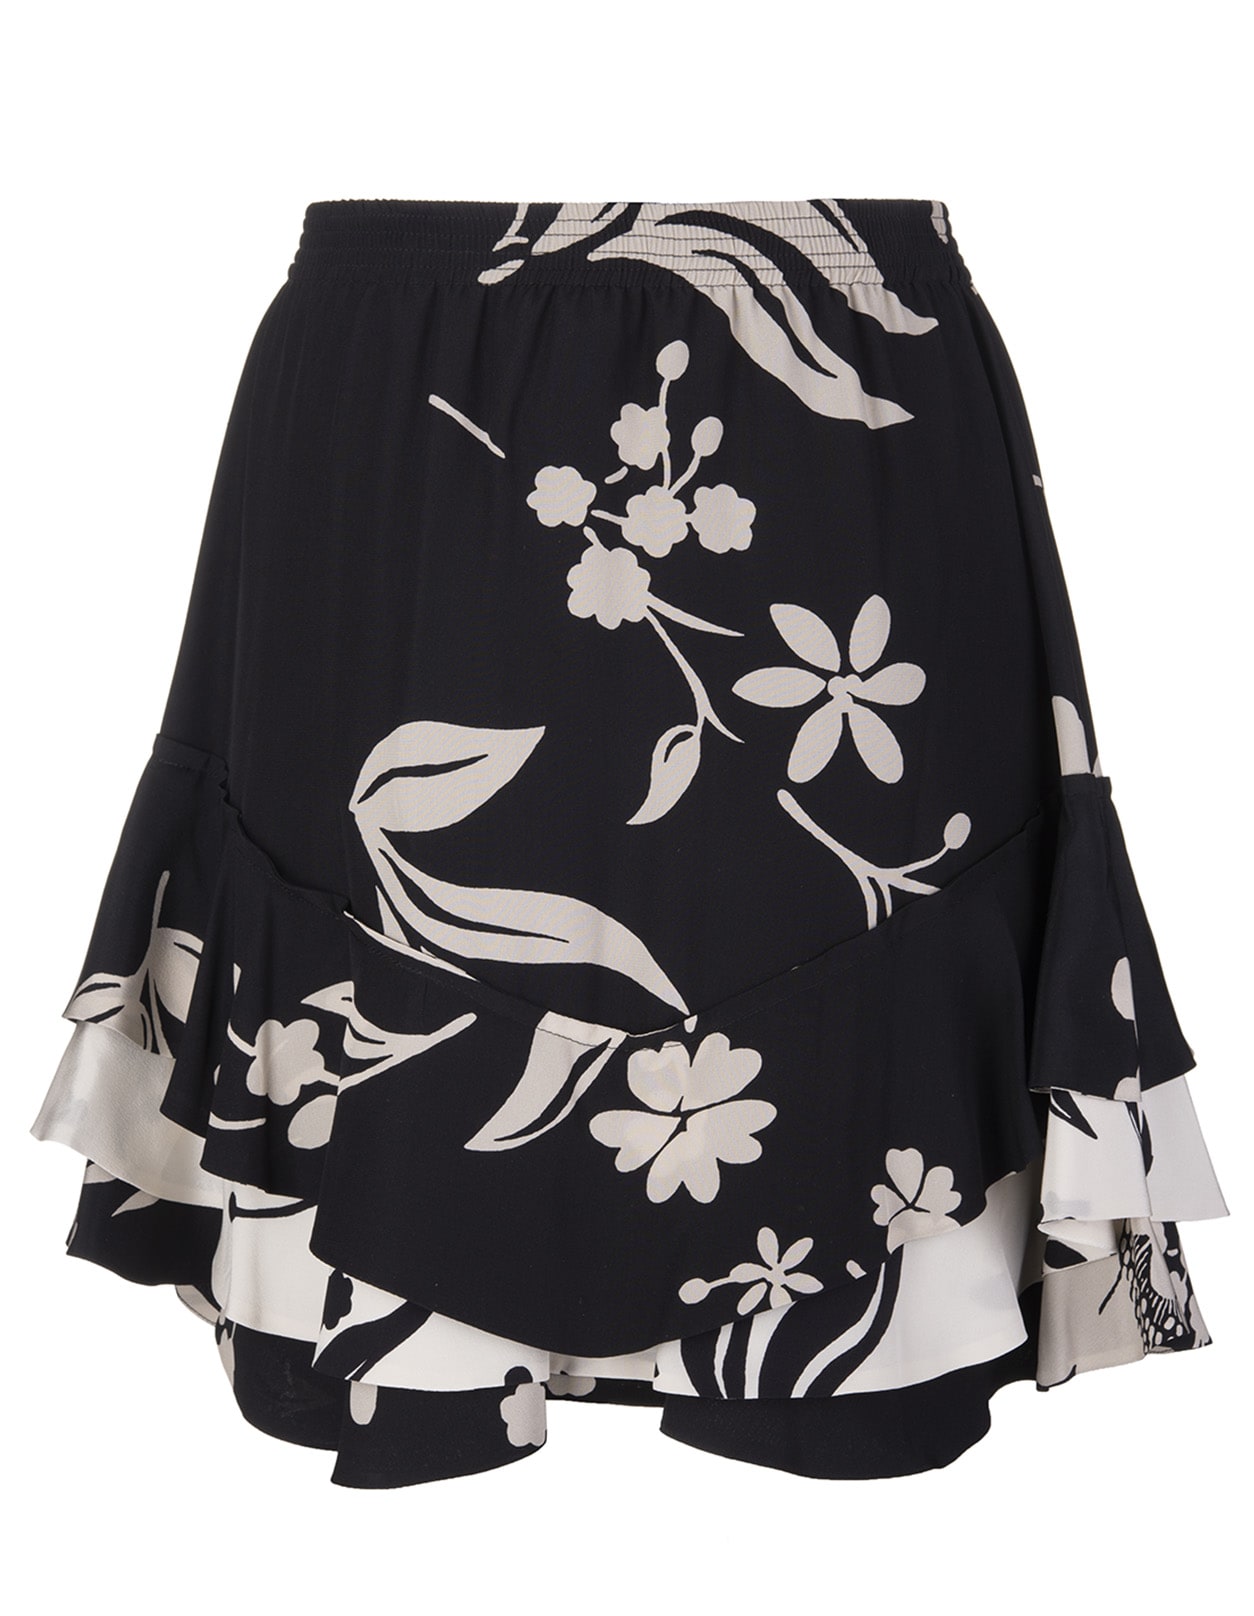 Ermanno Scervino Black Flounced Miniskirt With Ivory Floral Print